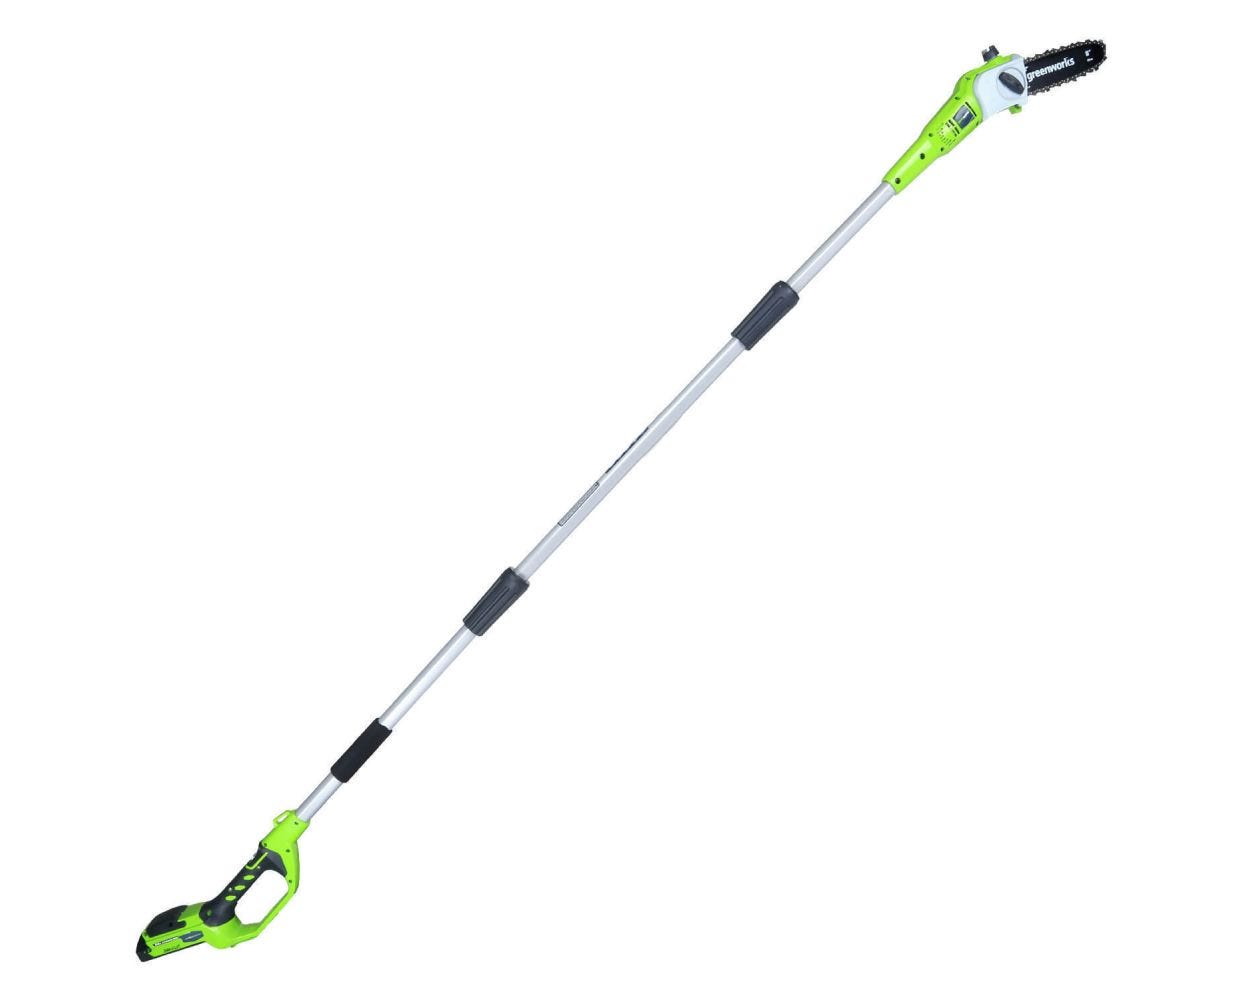 24V Cordless 8-inch Pole Saw (Tool Only)